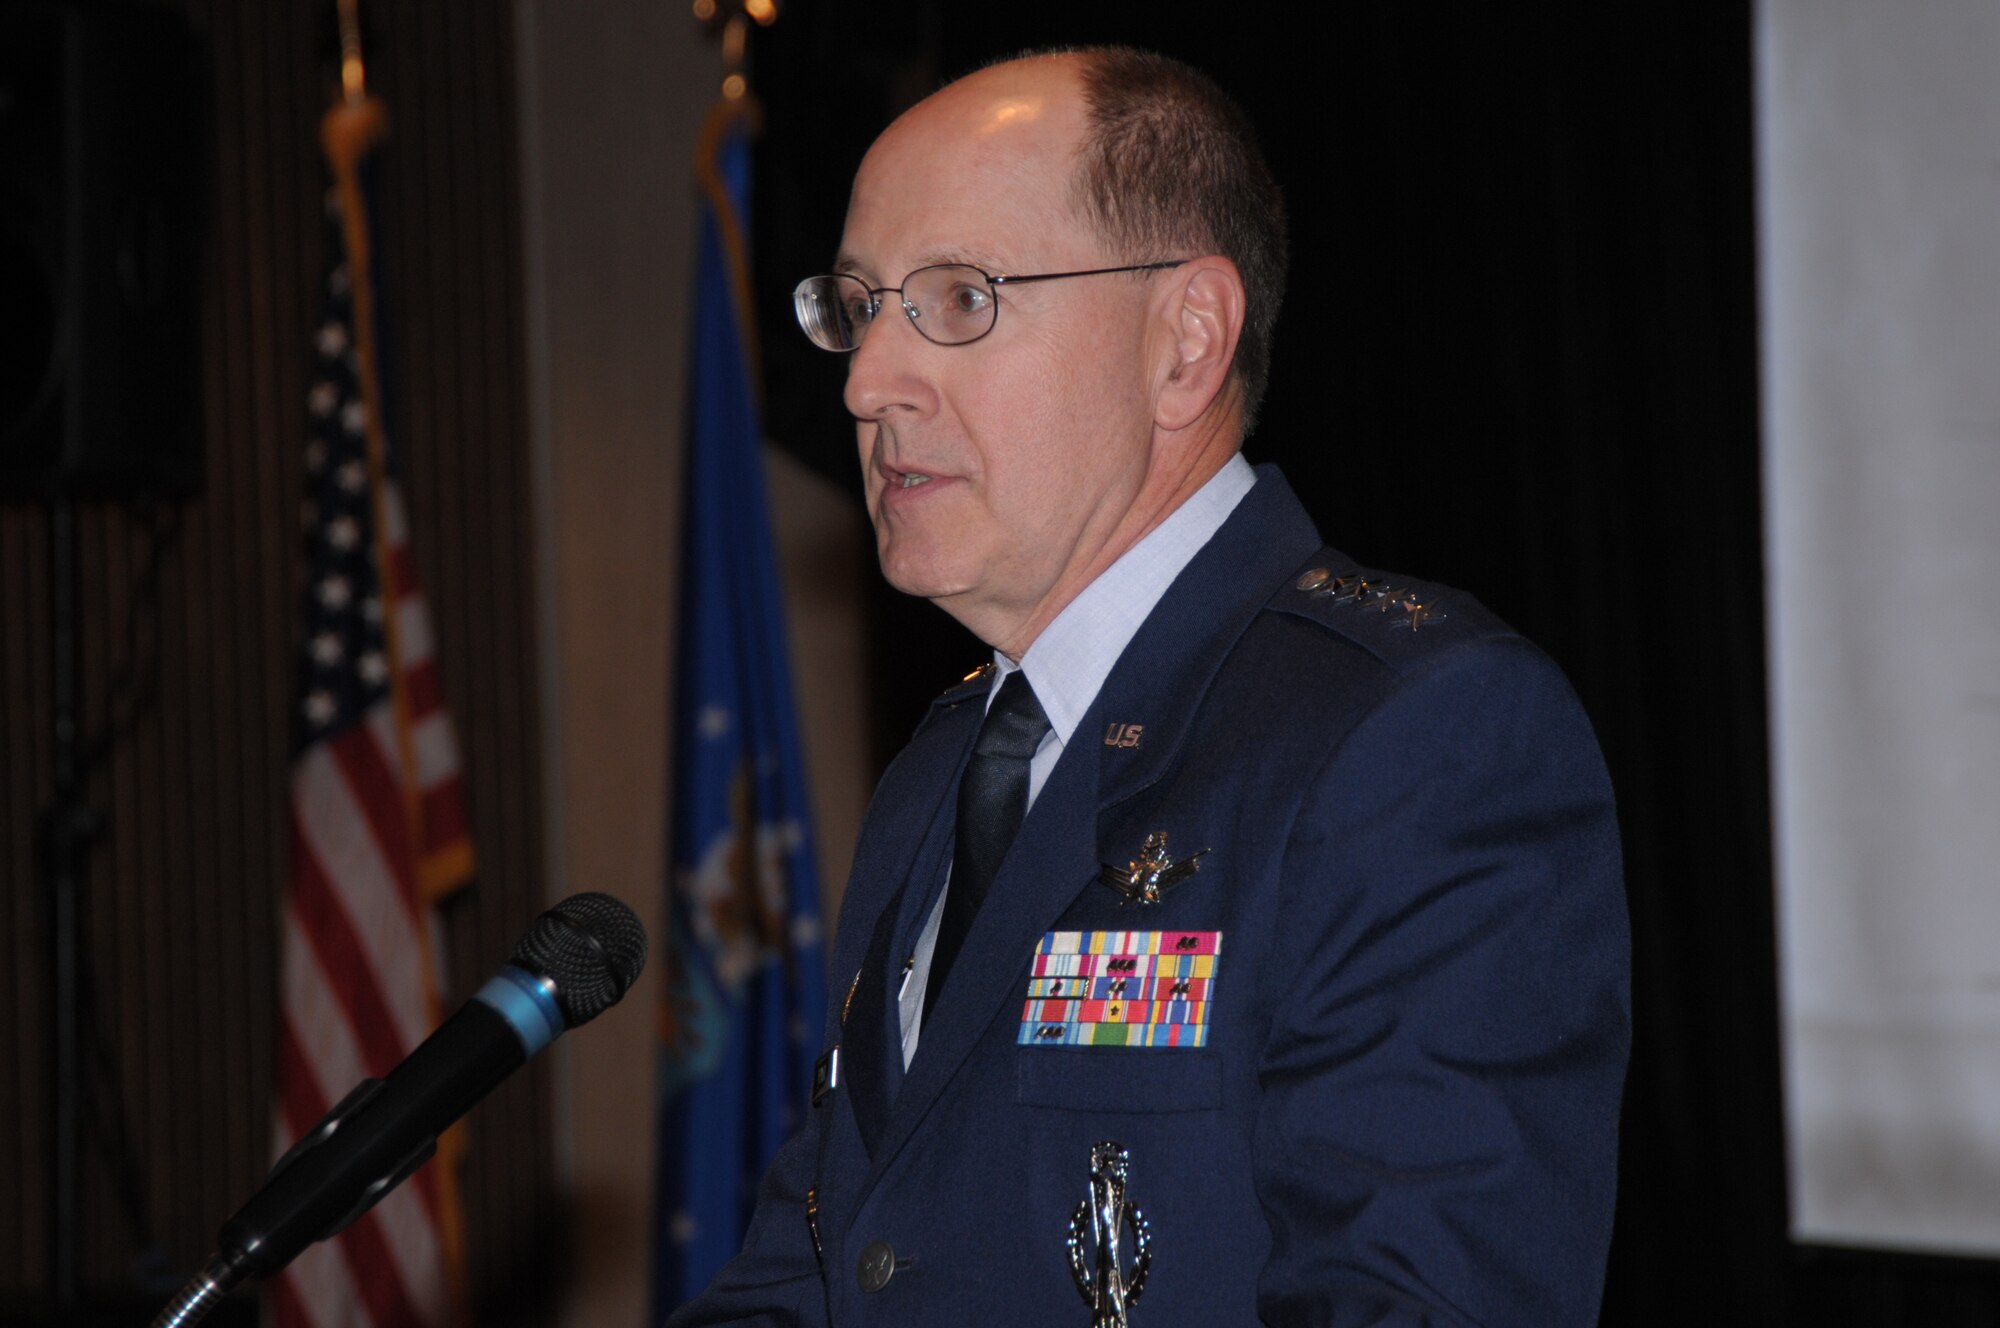 Gen. C. Robert Kehler addresses the Air Force Institute of Technology inaugural Cyber 200 and 300 graduating classes at Wright-Patterson Air Force Base, Ohio, on Oct. 28, 2010. General Kehler is commander of Air Force Space Command at Peterson Air Force Base, Colorado. (U.S. Air Force photo/Al Bright).